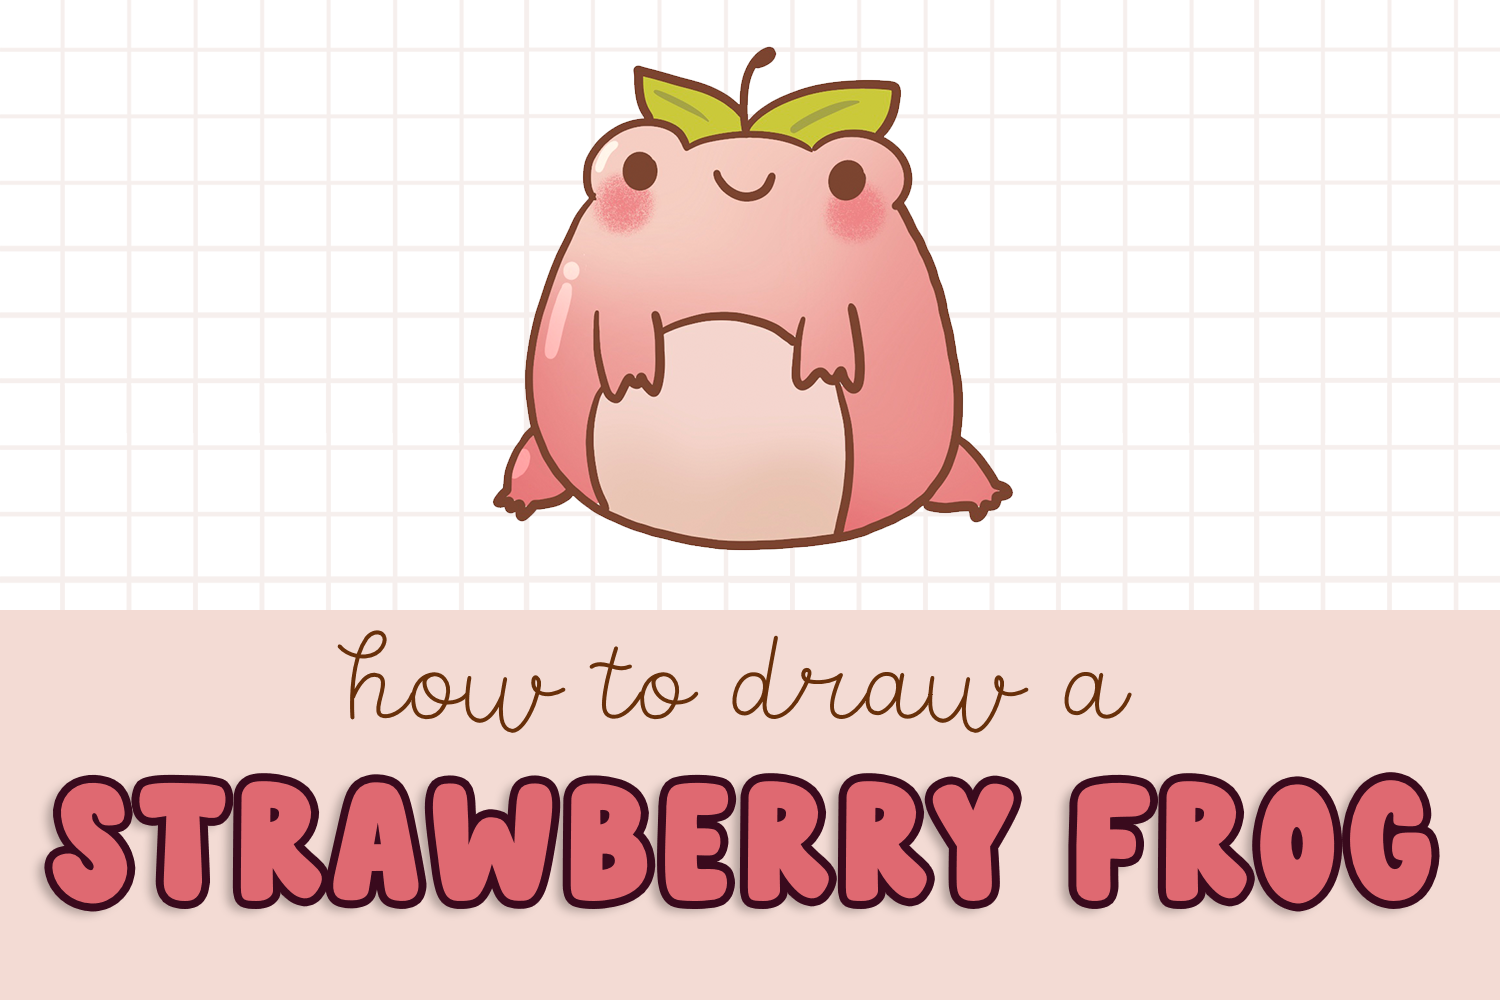 How to Draw a Strawberry Frog (Easy Beginner Guide)